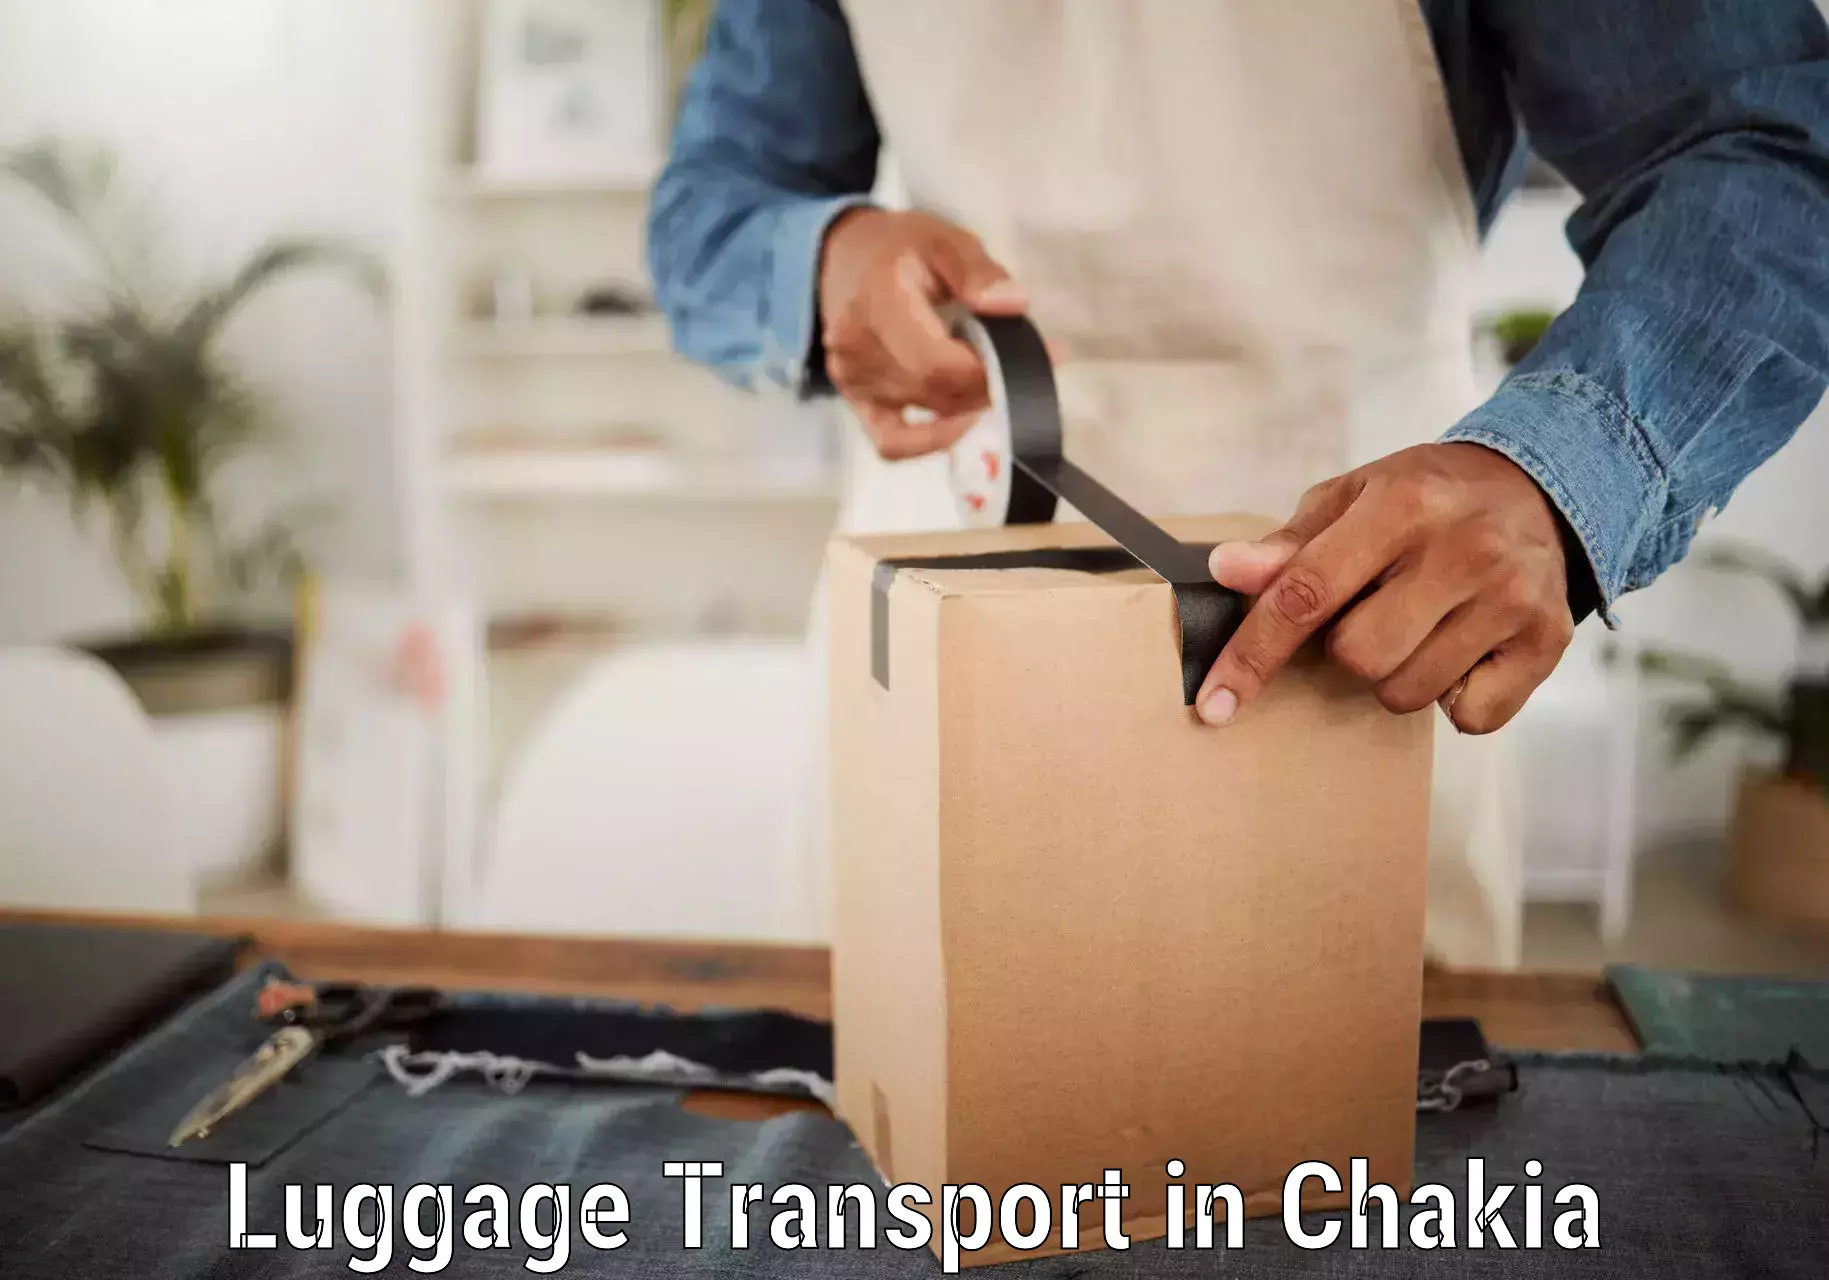 Luggage transport consultancy in Chakia